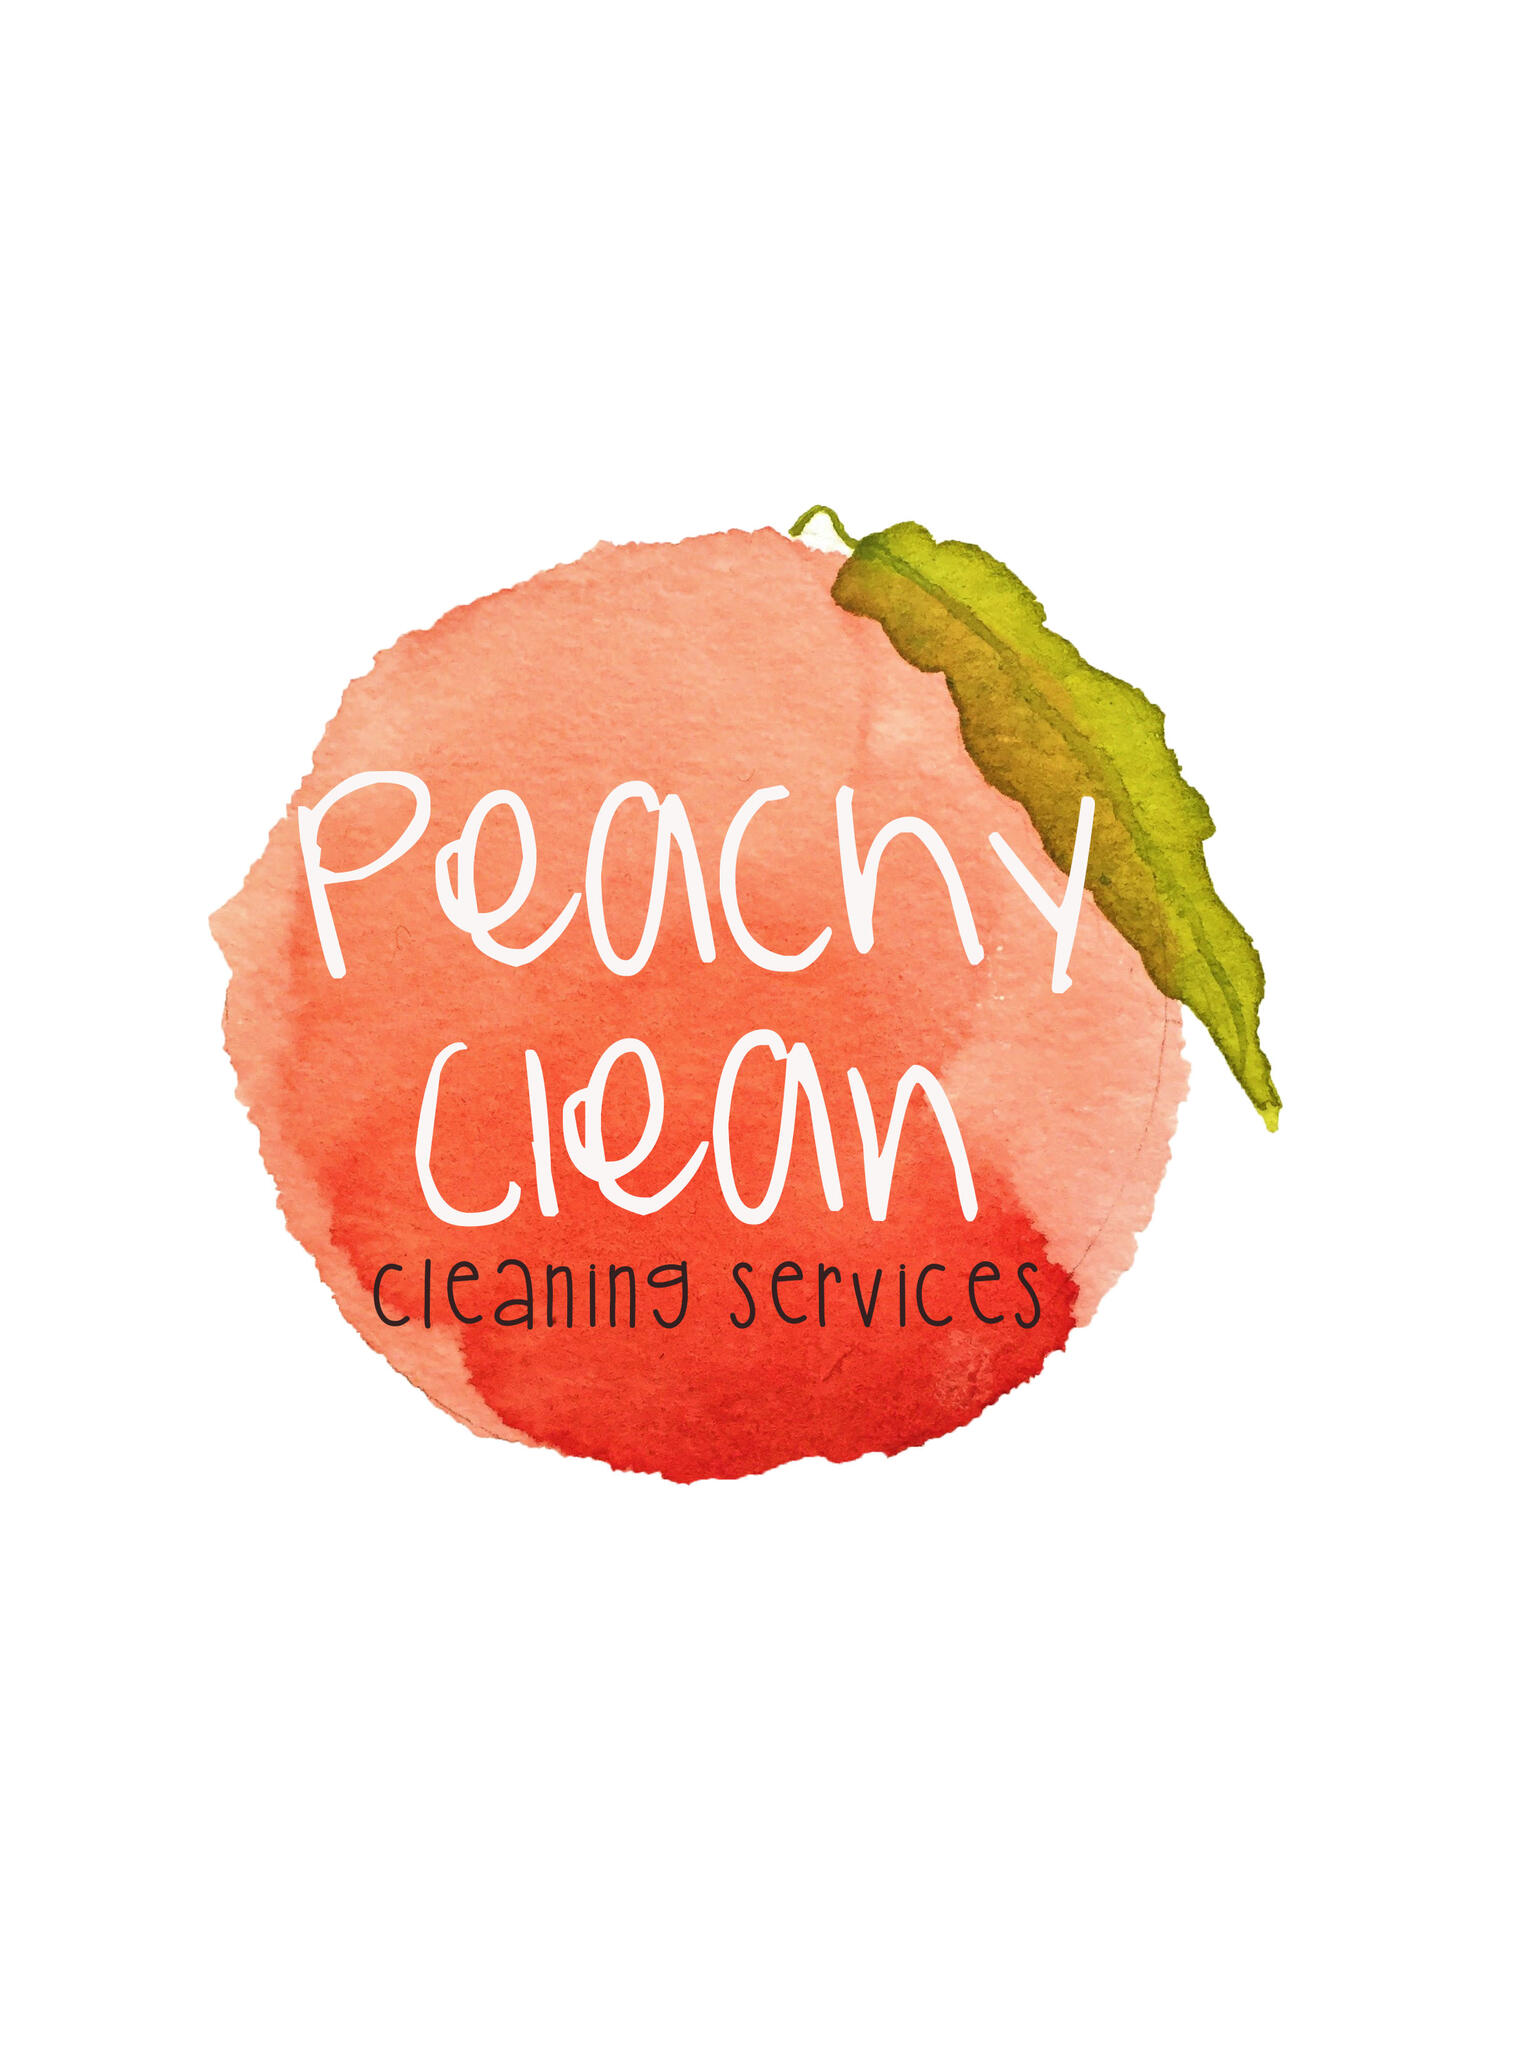 Peachy clean, cleaning services